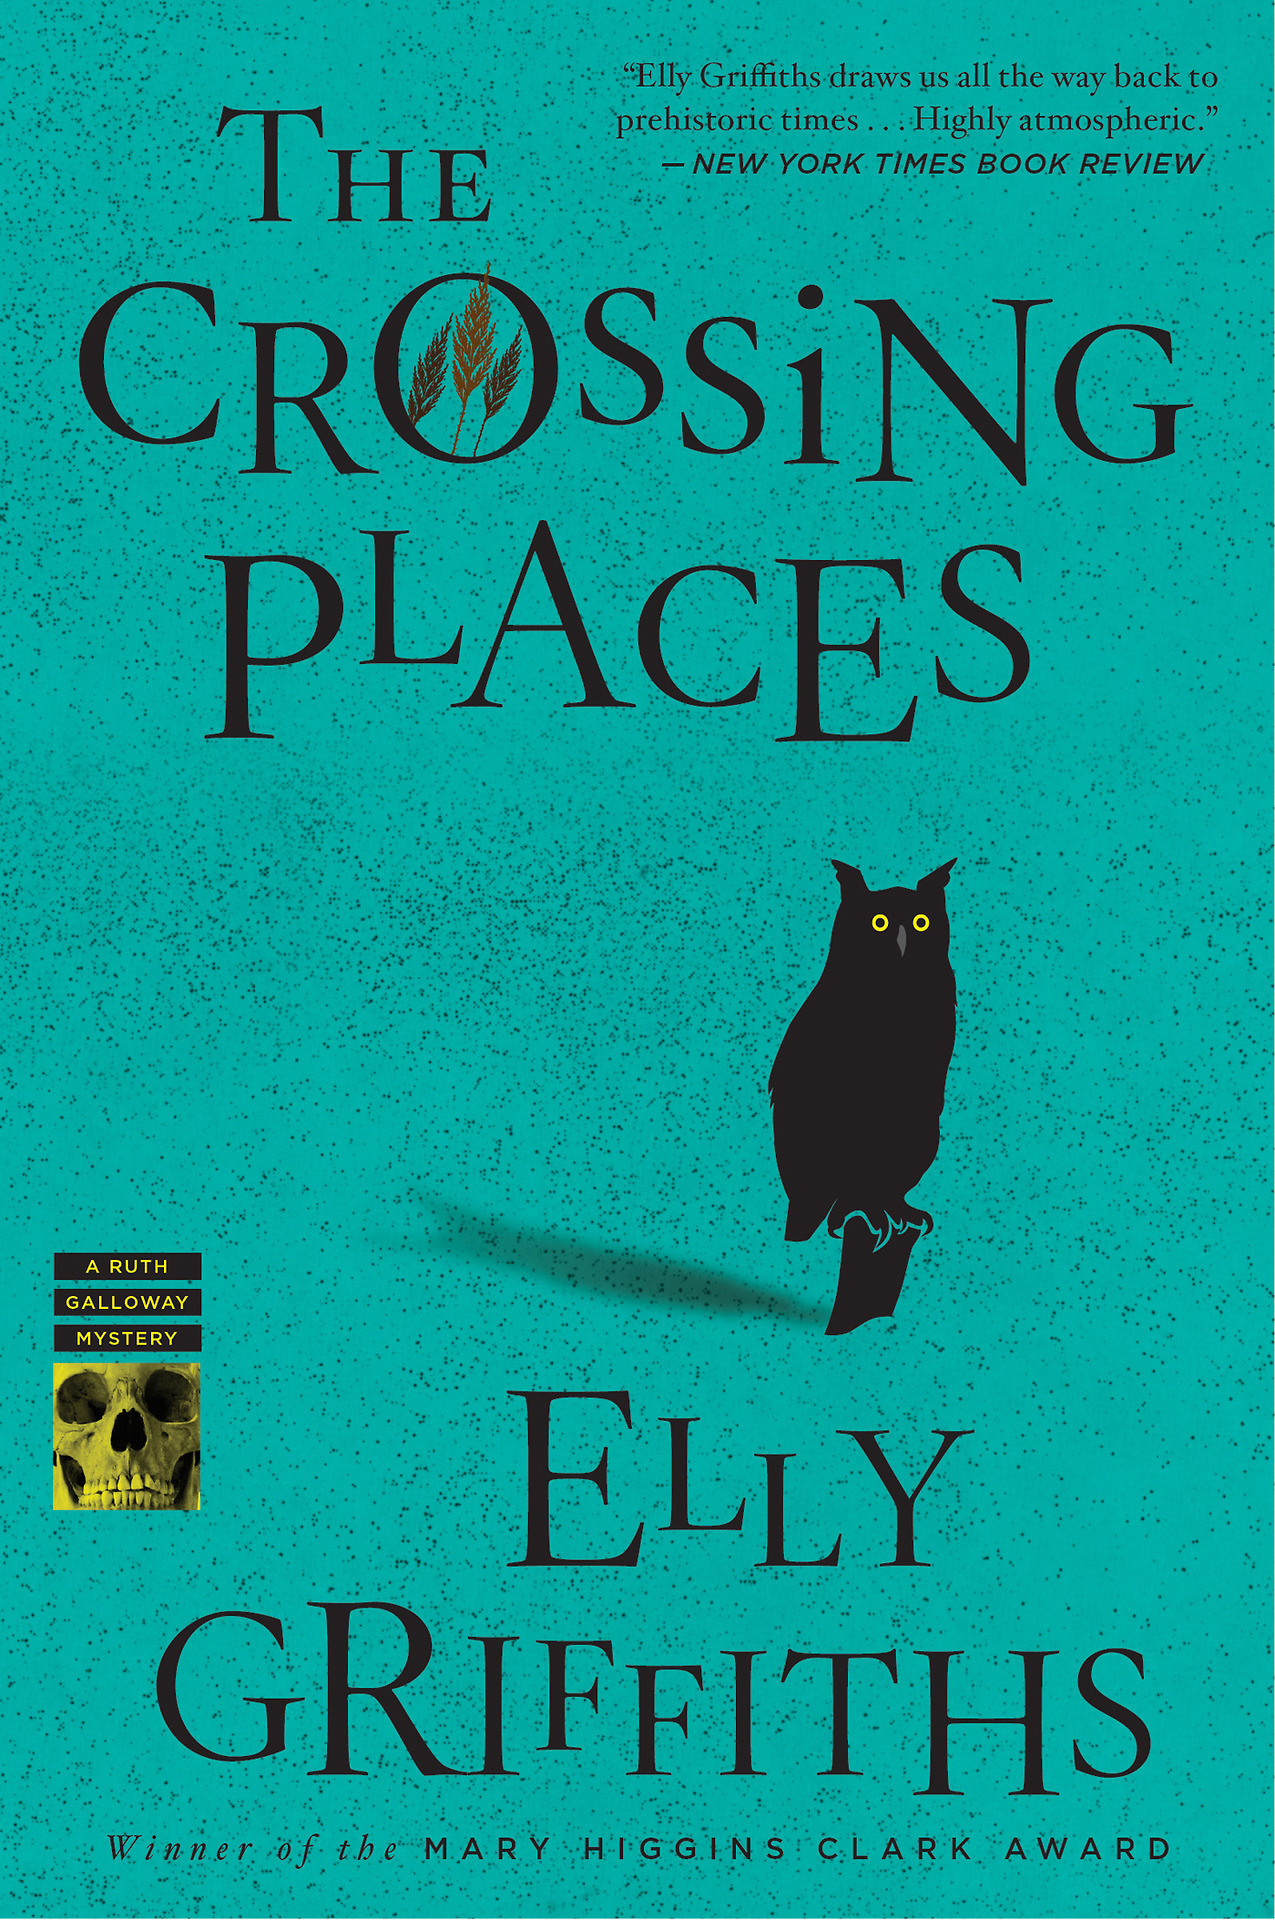 Attention, cozy mystery fans! The first book in the Ruth Galloway Mystery series, THE CROSSING PLACES by Elly Griffiths, is only $1.99 on your e-reader for a very limited time! If you’re looking for a new series to dig into (ha, that’s a pun, you’ll...